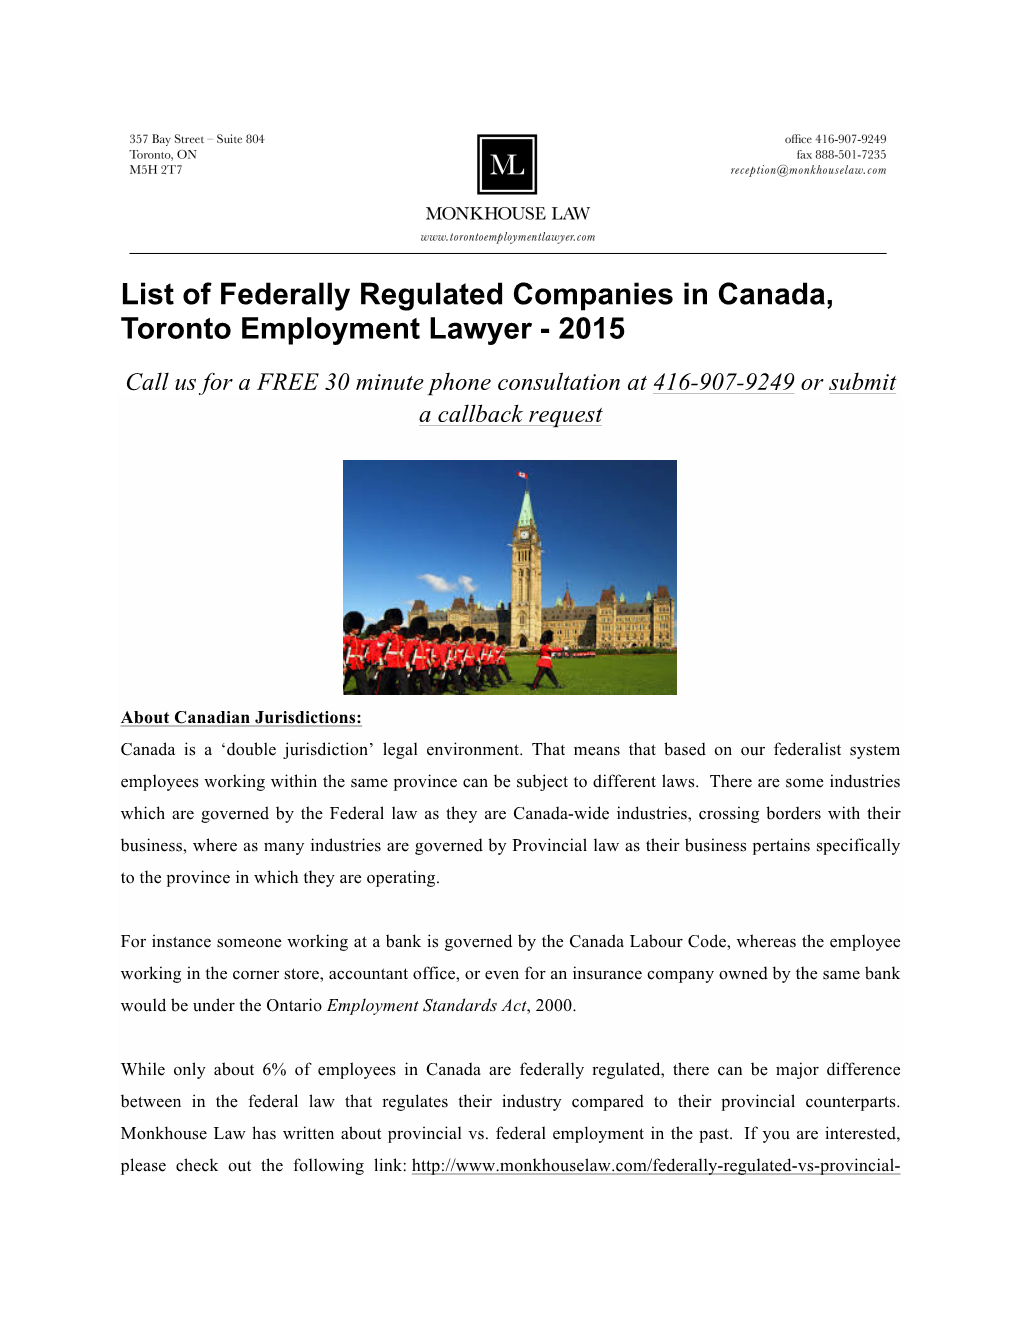 List of Federally Regulated Companies in Canada, Toronto Employment Lawyer - 2015